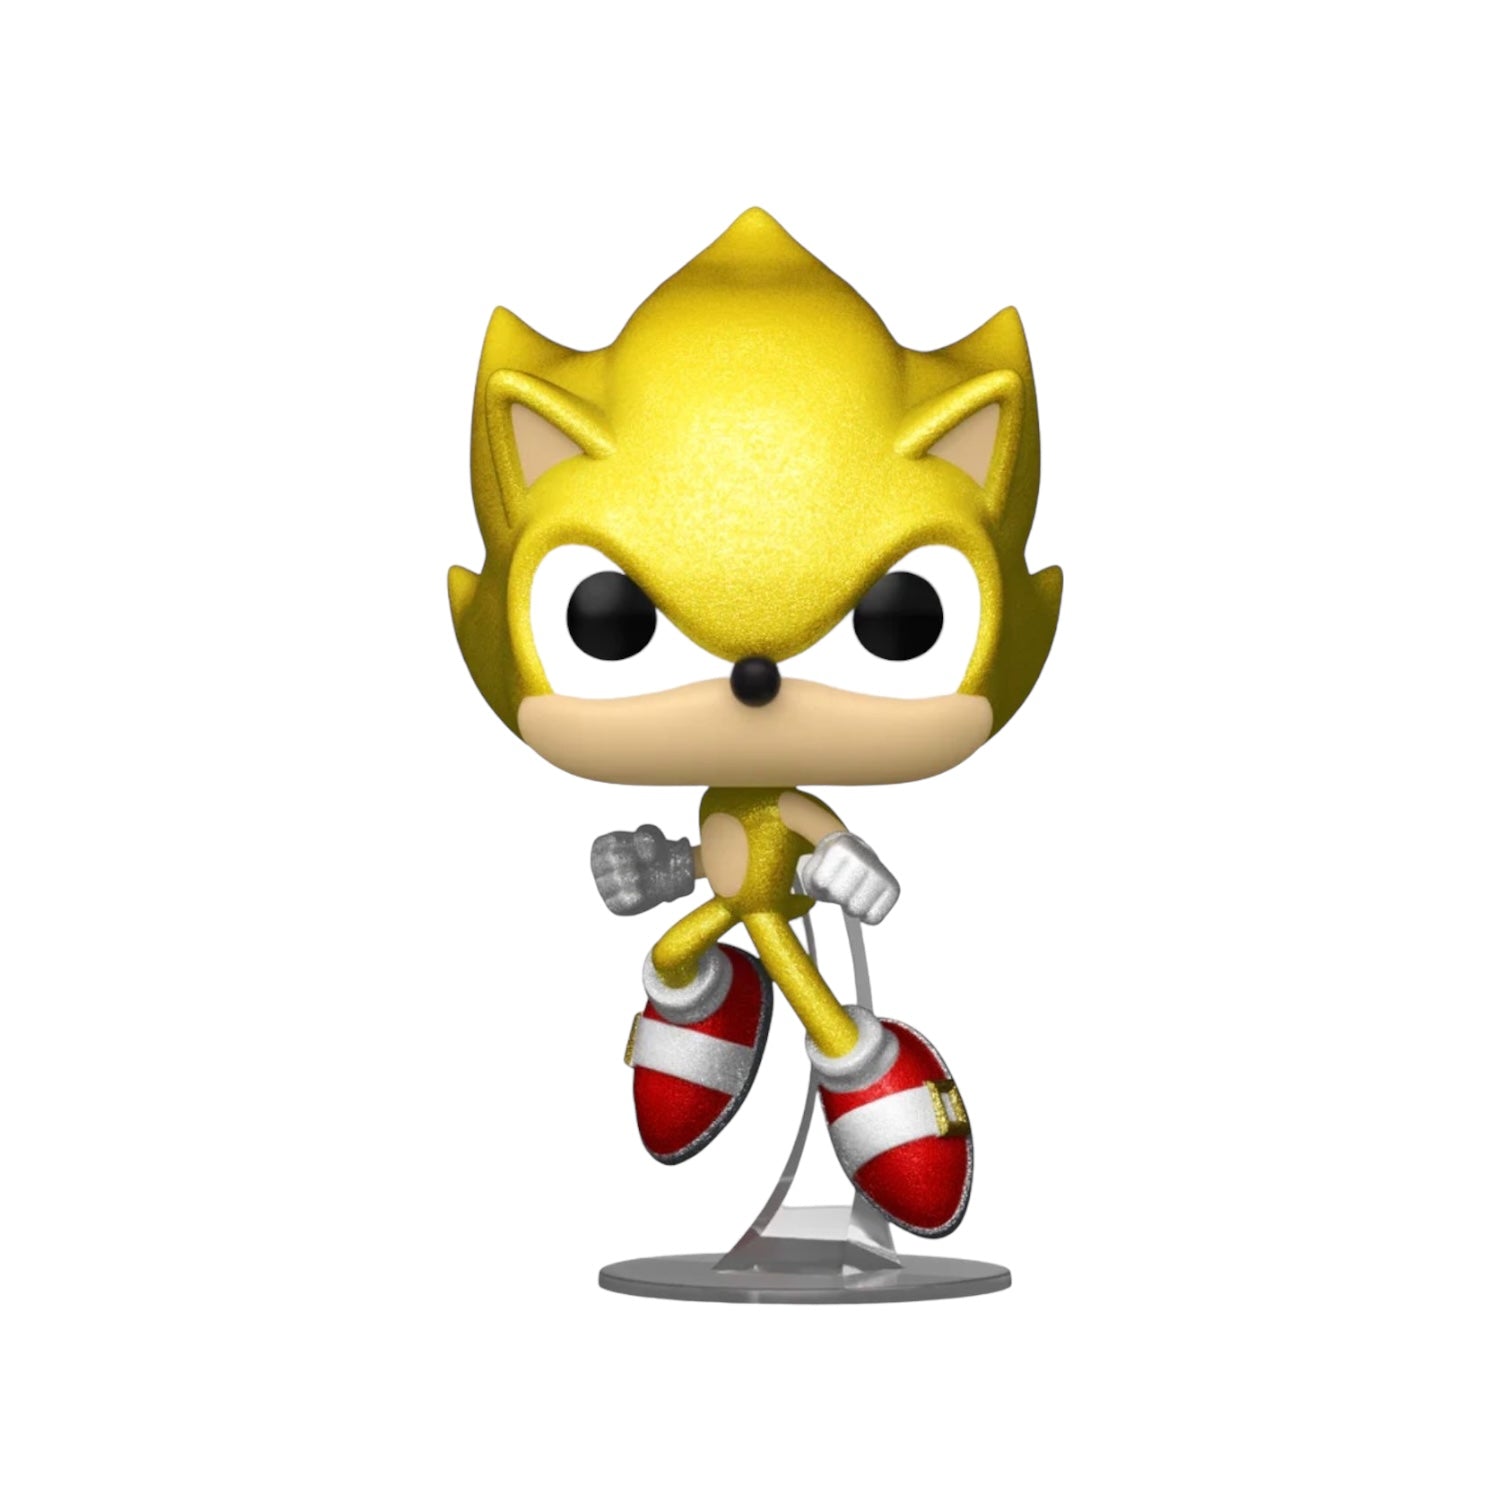 Super Sonic #923 with a Chance of Chase Funko Pop! - Sonic the Hedgehog - Special Edition - Pop Figures Exclusive